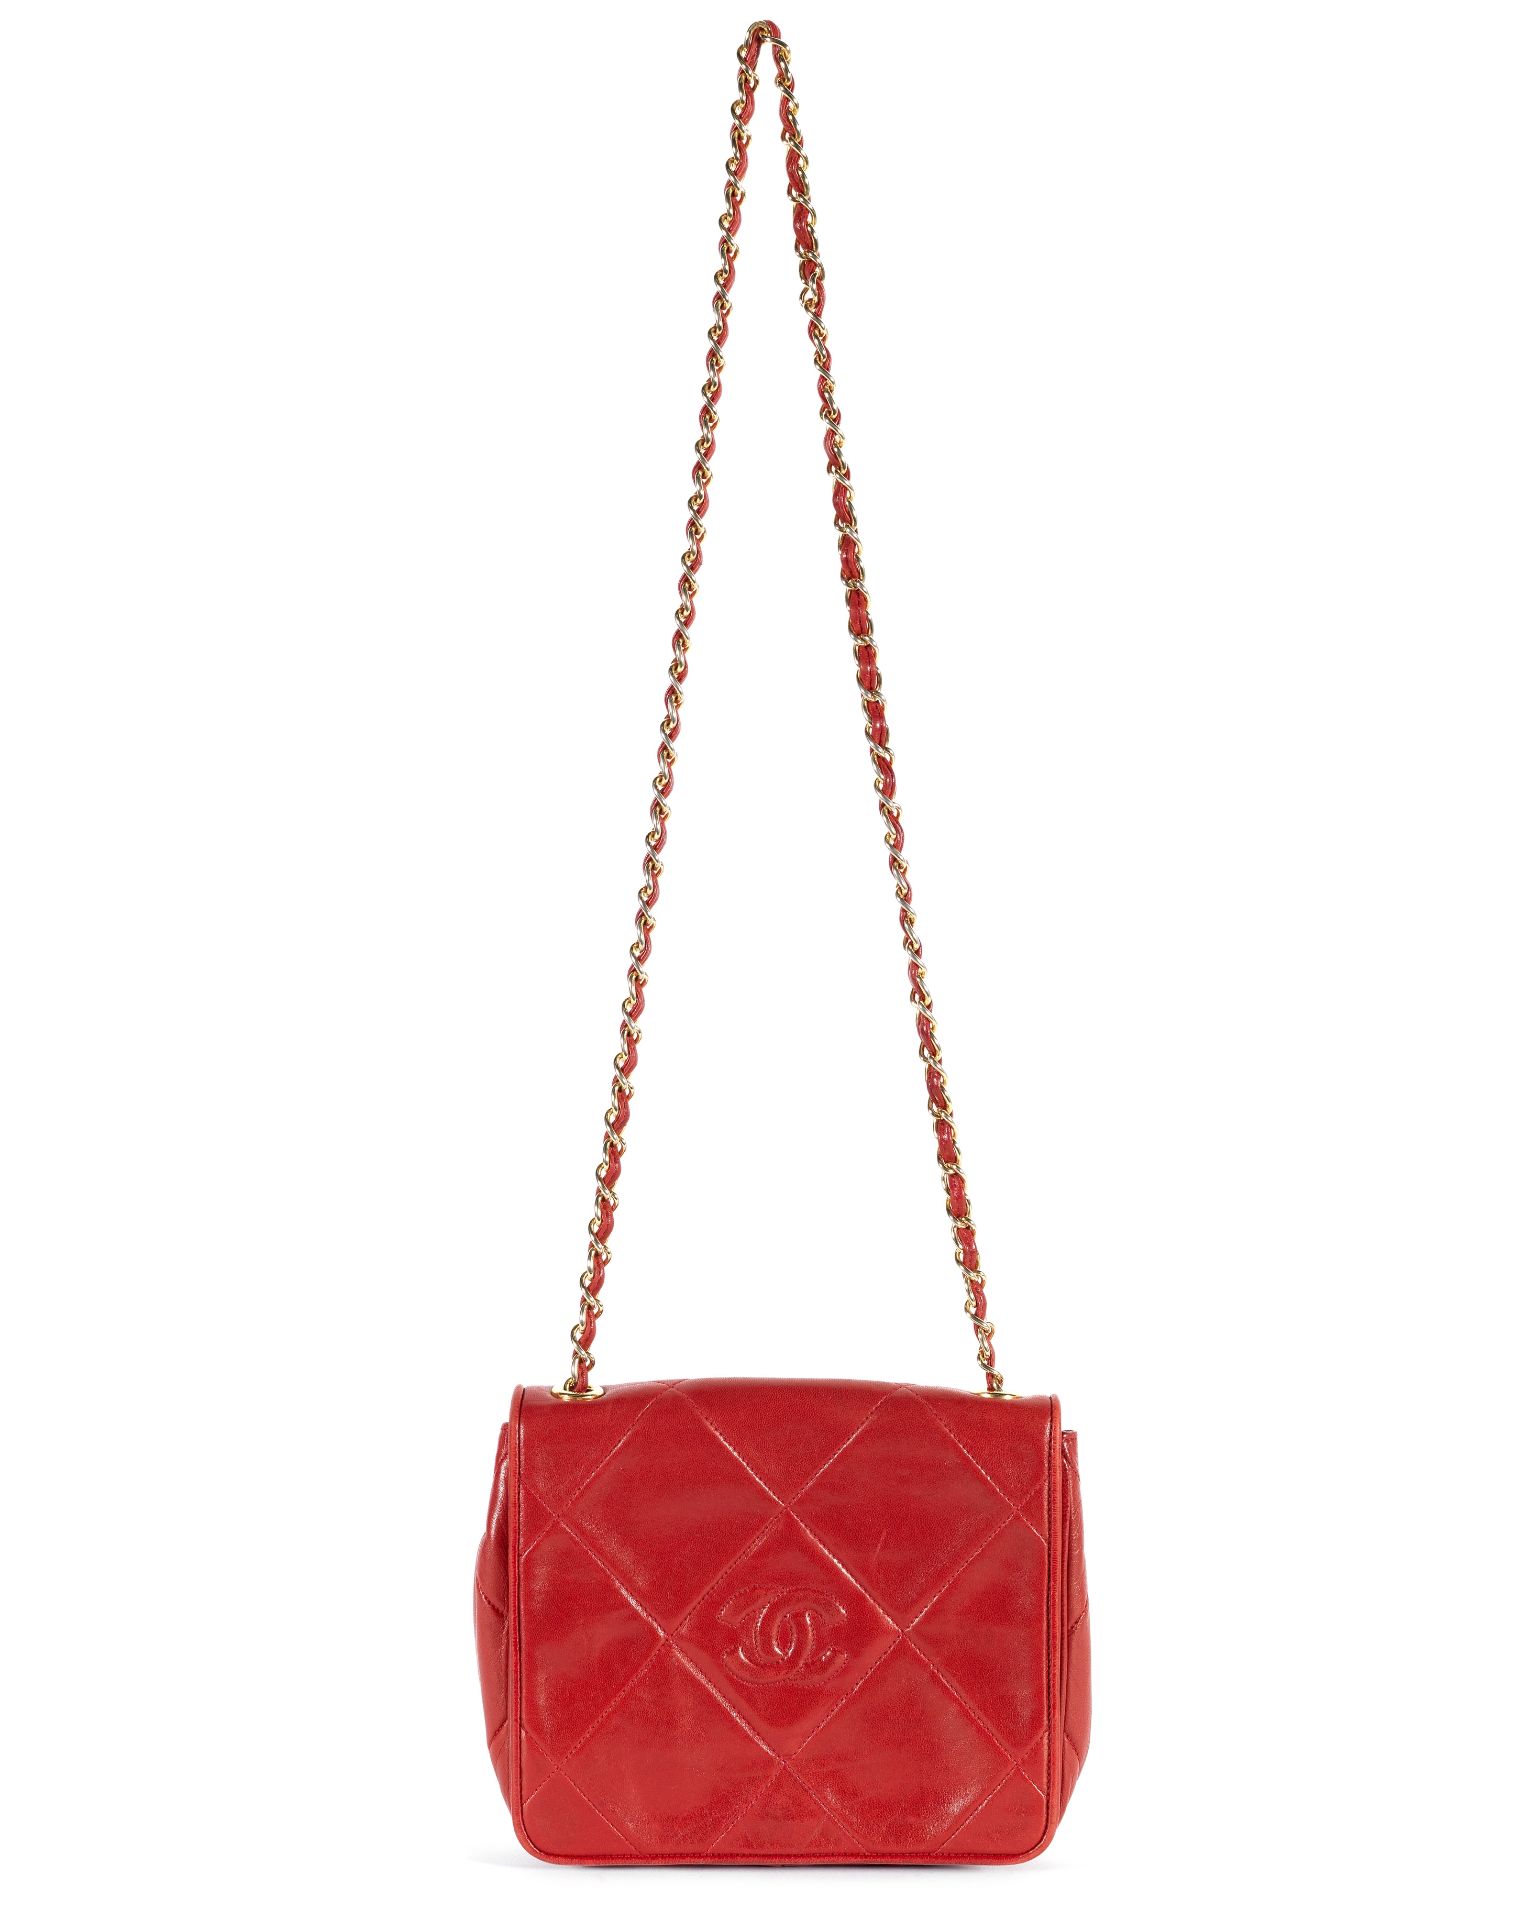 Red Full Flap Crossbody Bag, Chanel, c. 1986-89, (Includes serial sticker and authenticity card )